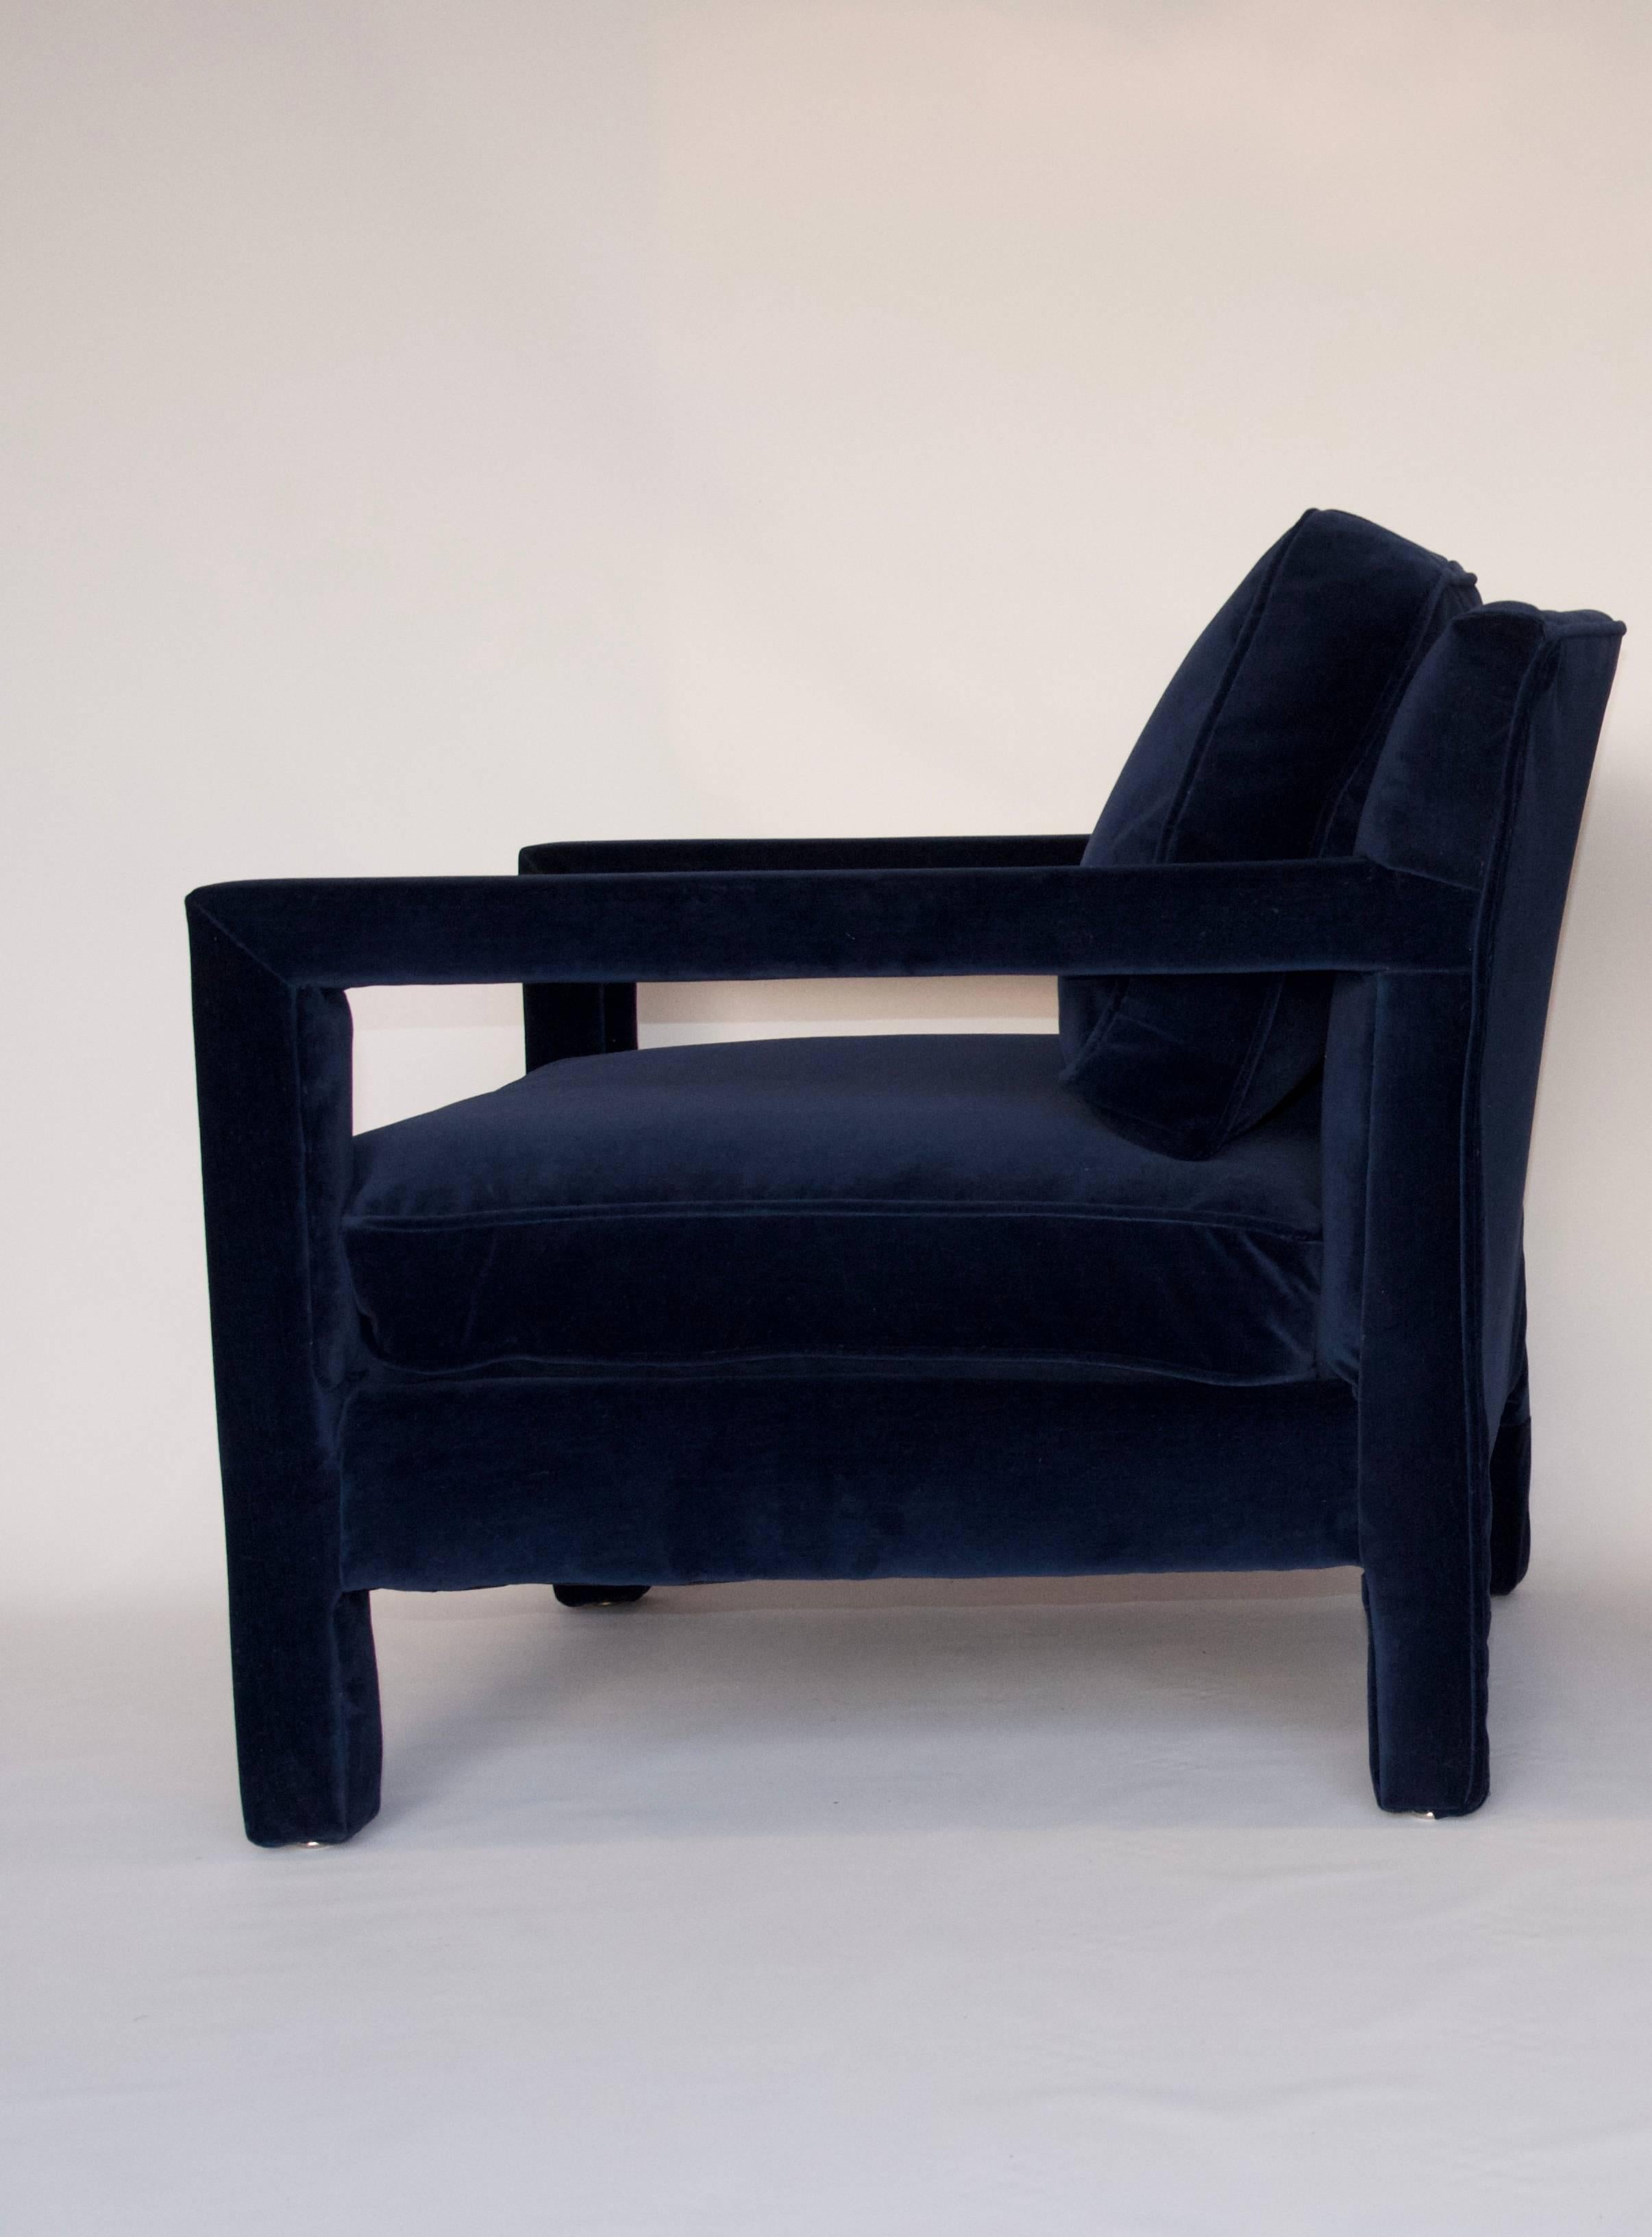 This fully upholstered Parsons style chair was made in the style of Milo Baughman by Bernhardt. The chair has been newly upholstered in a high quality blue velvet. Both the back and seat cushions are removable. Extremely comfortable and in excellent